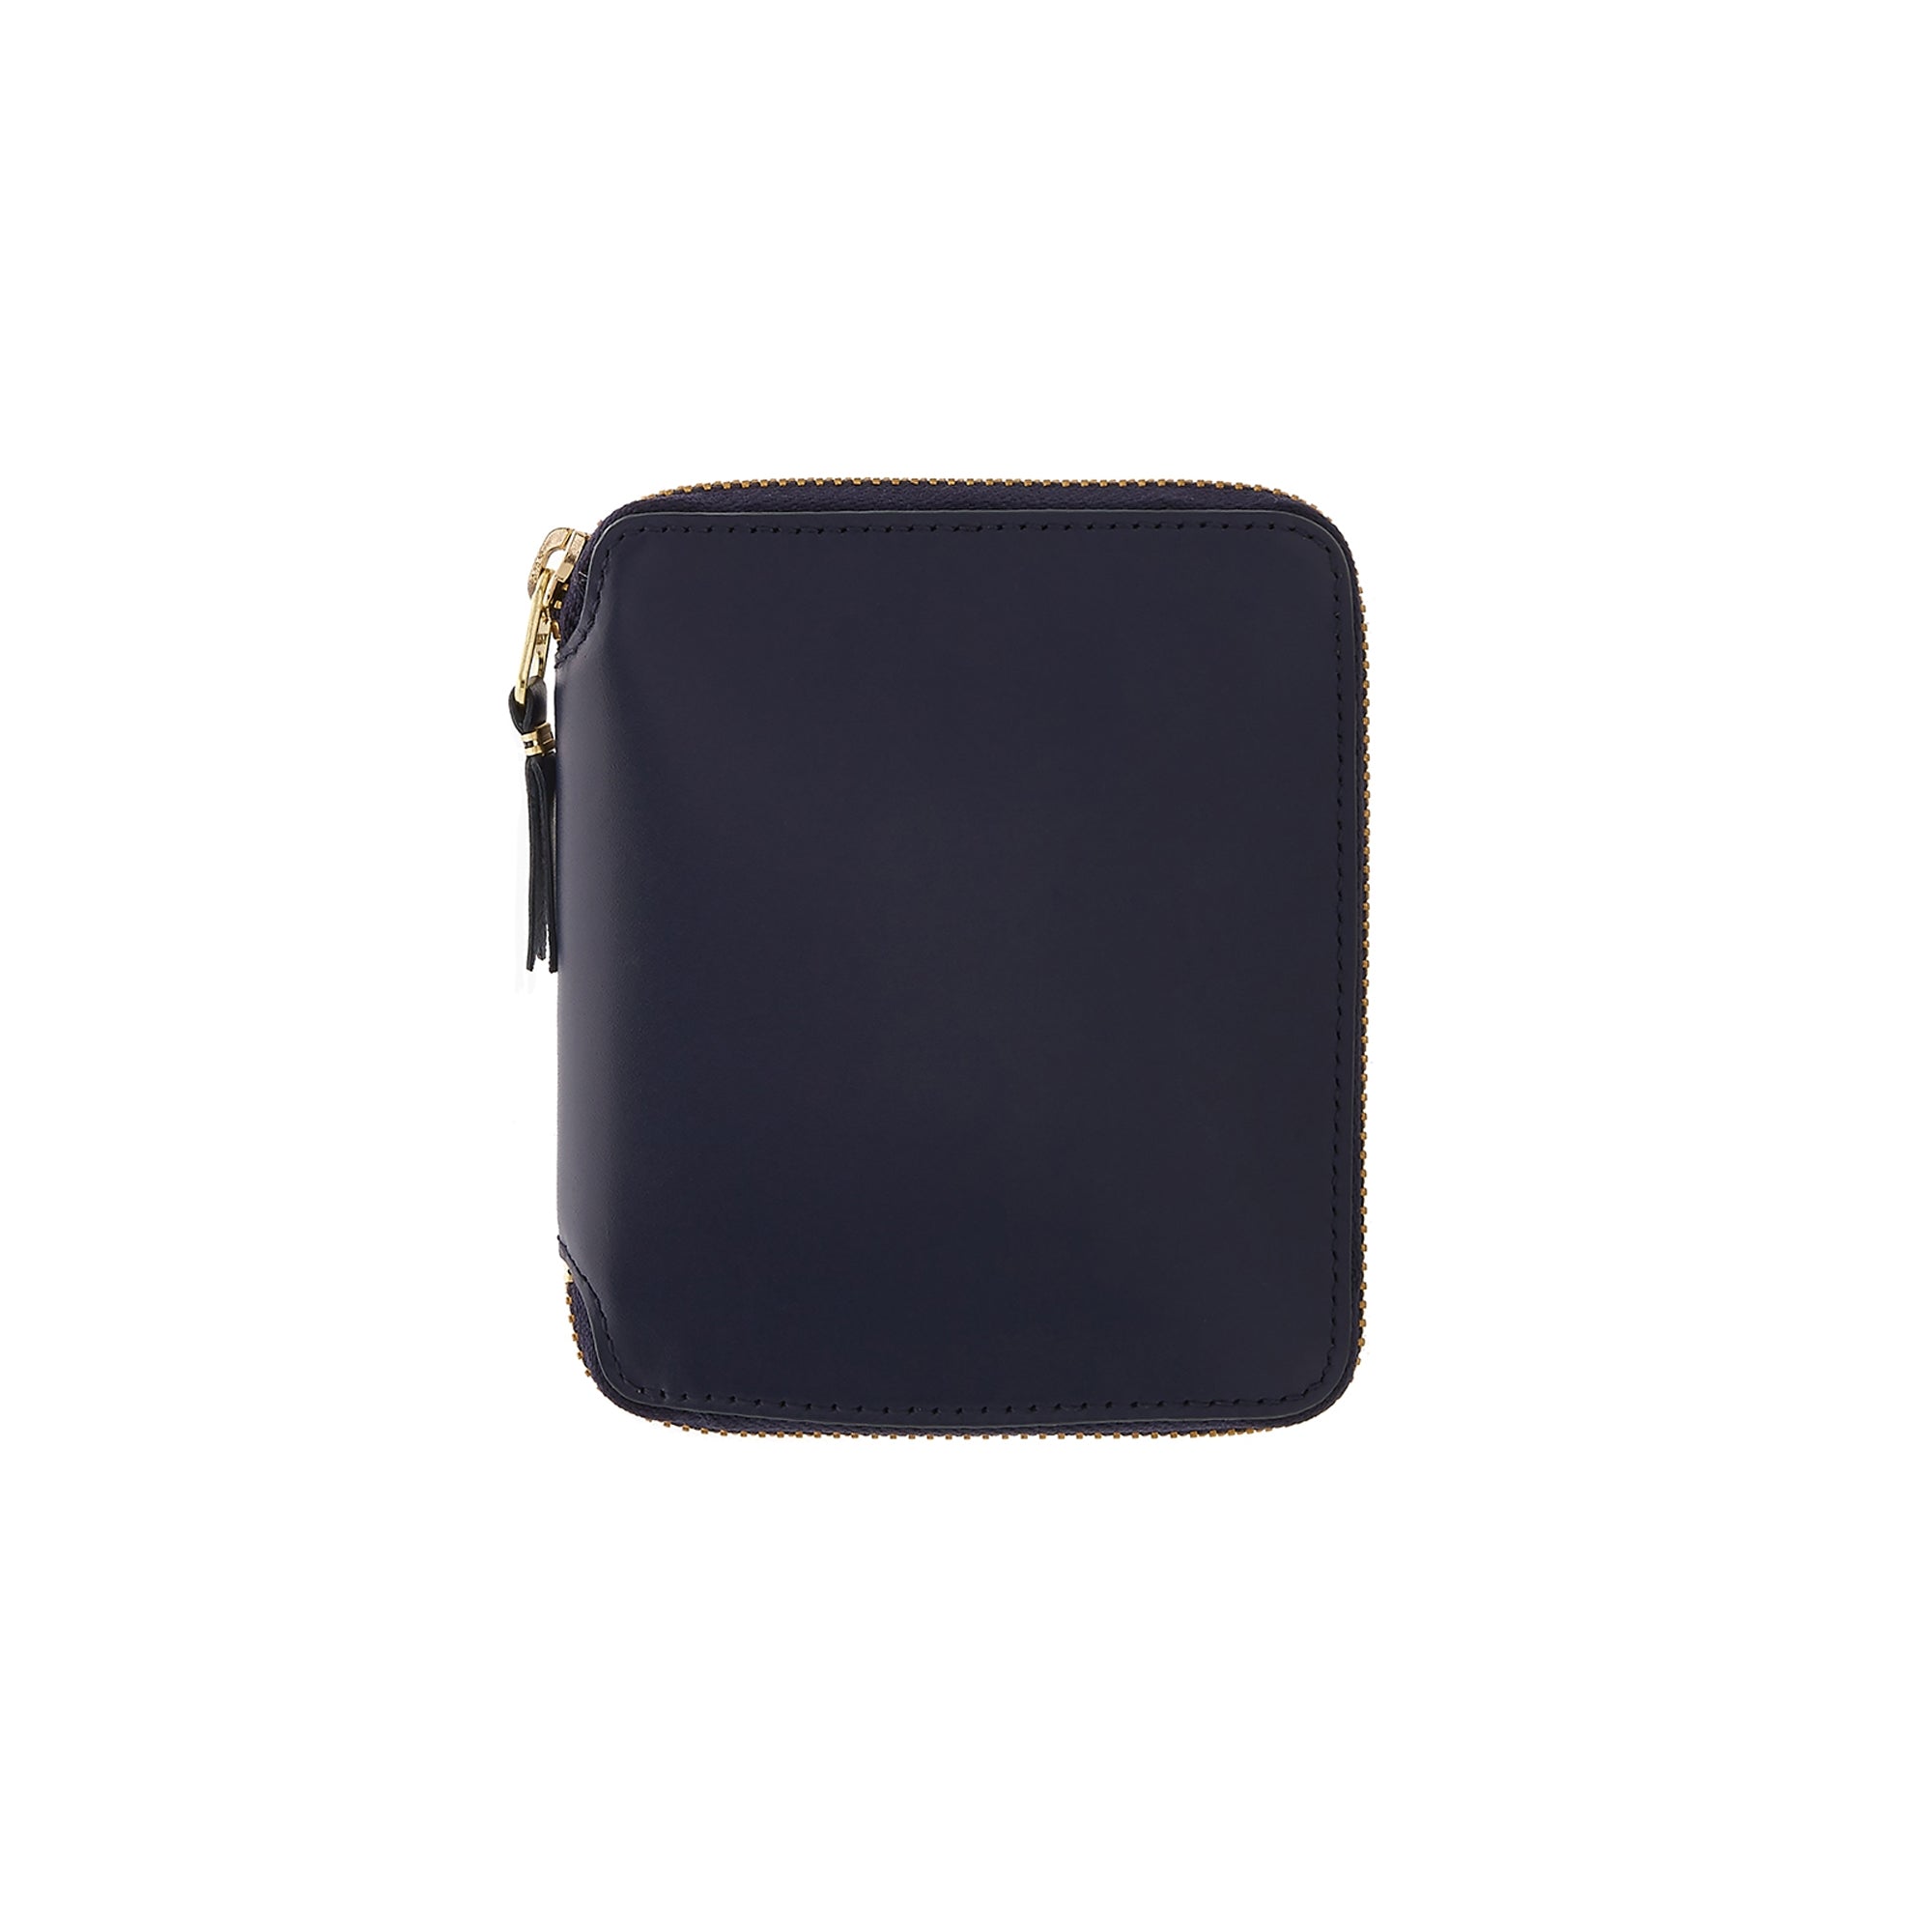 CDG Wallet - Classic Leather Full Zip Around Wallet - (SA2100 Navy)